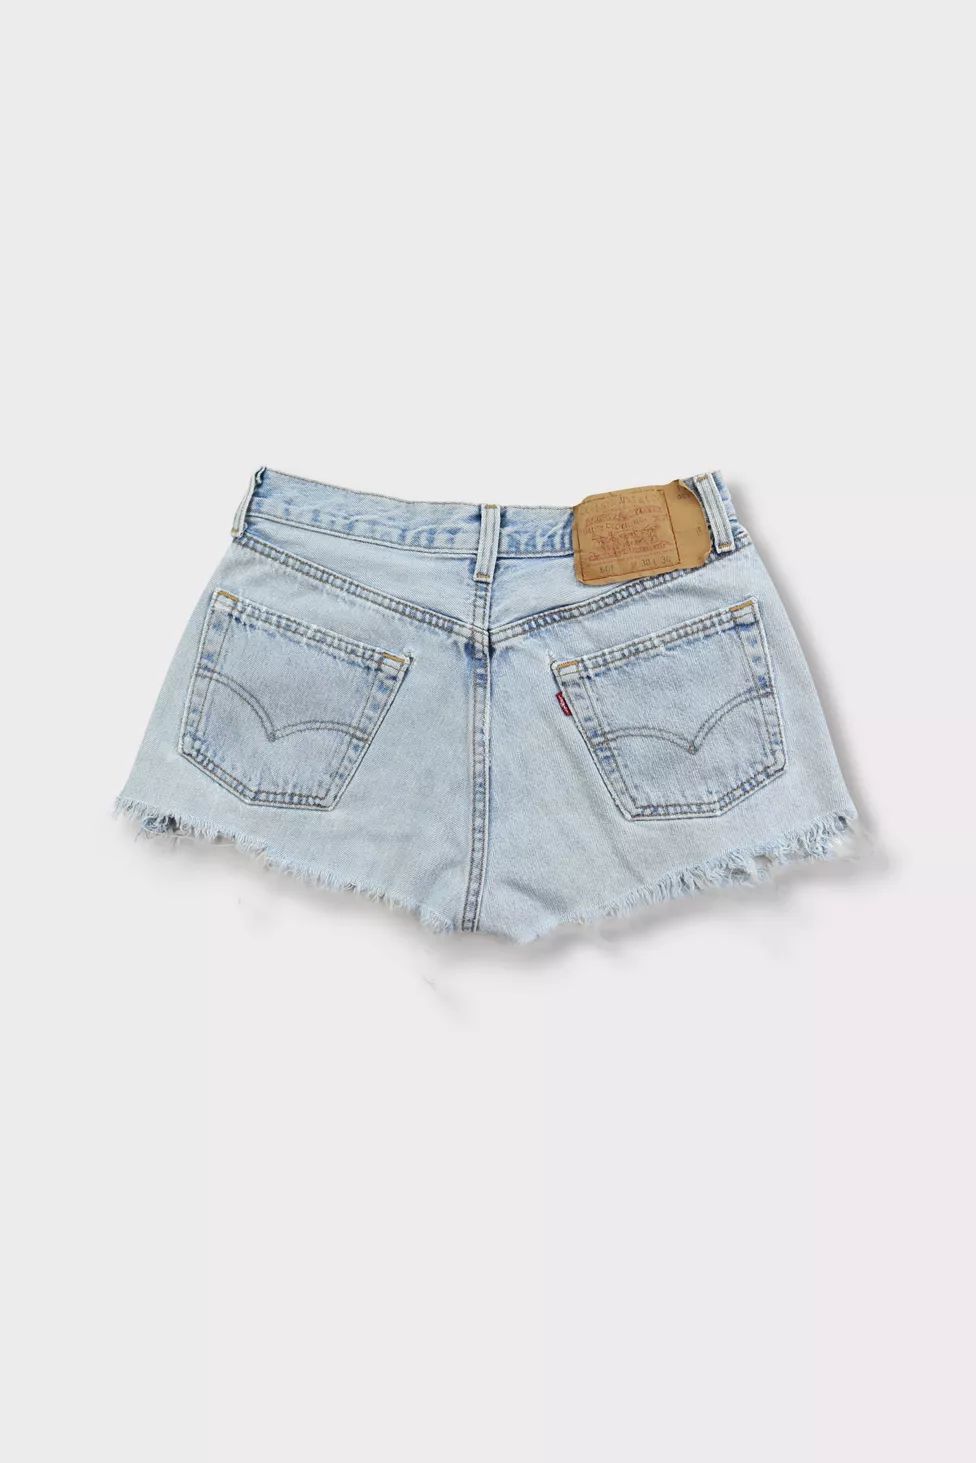 Vintage 90s Levi’s 501 Grungy Light Wash Button Fly Shorts | Urban Outfitters (US and RoW)